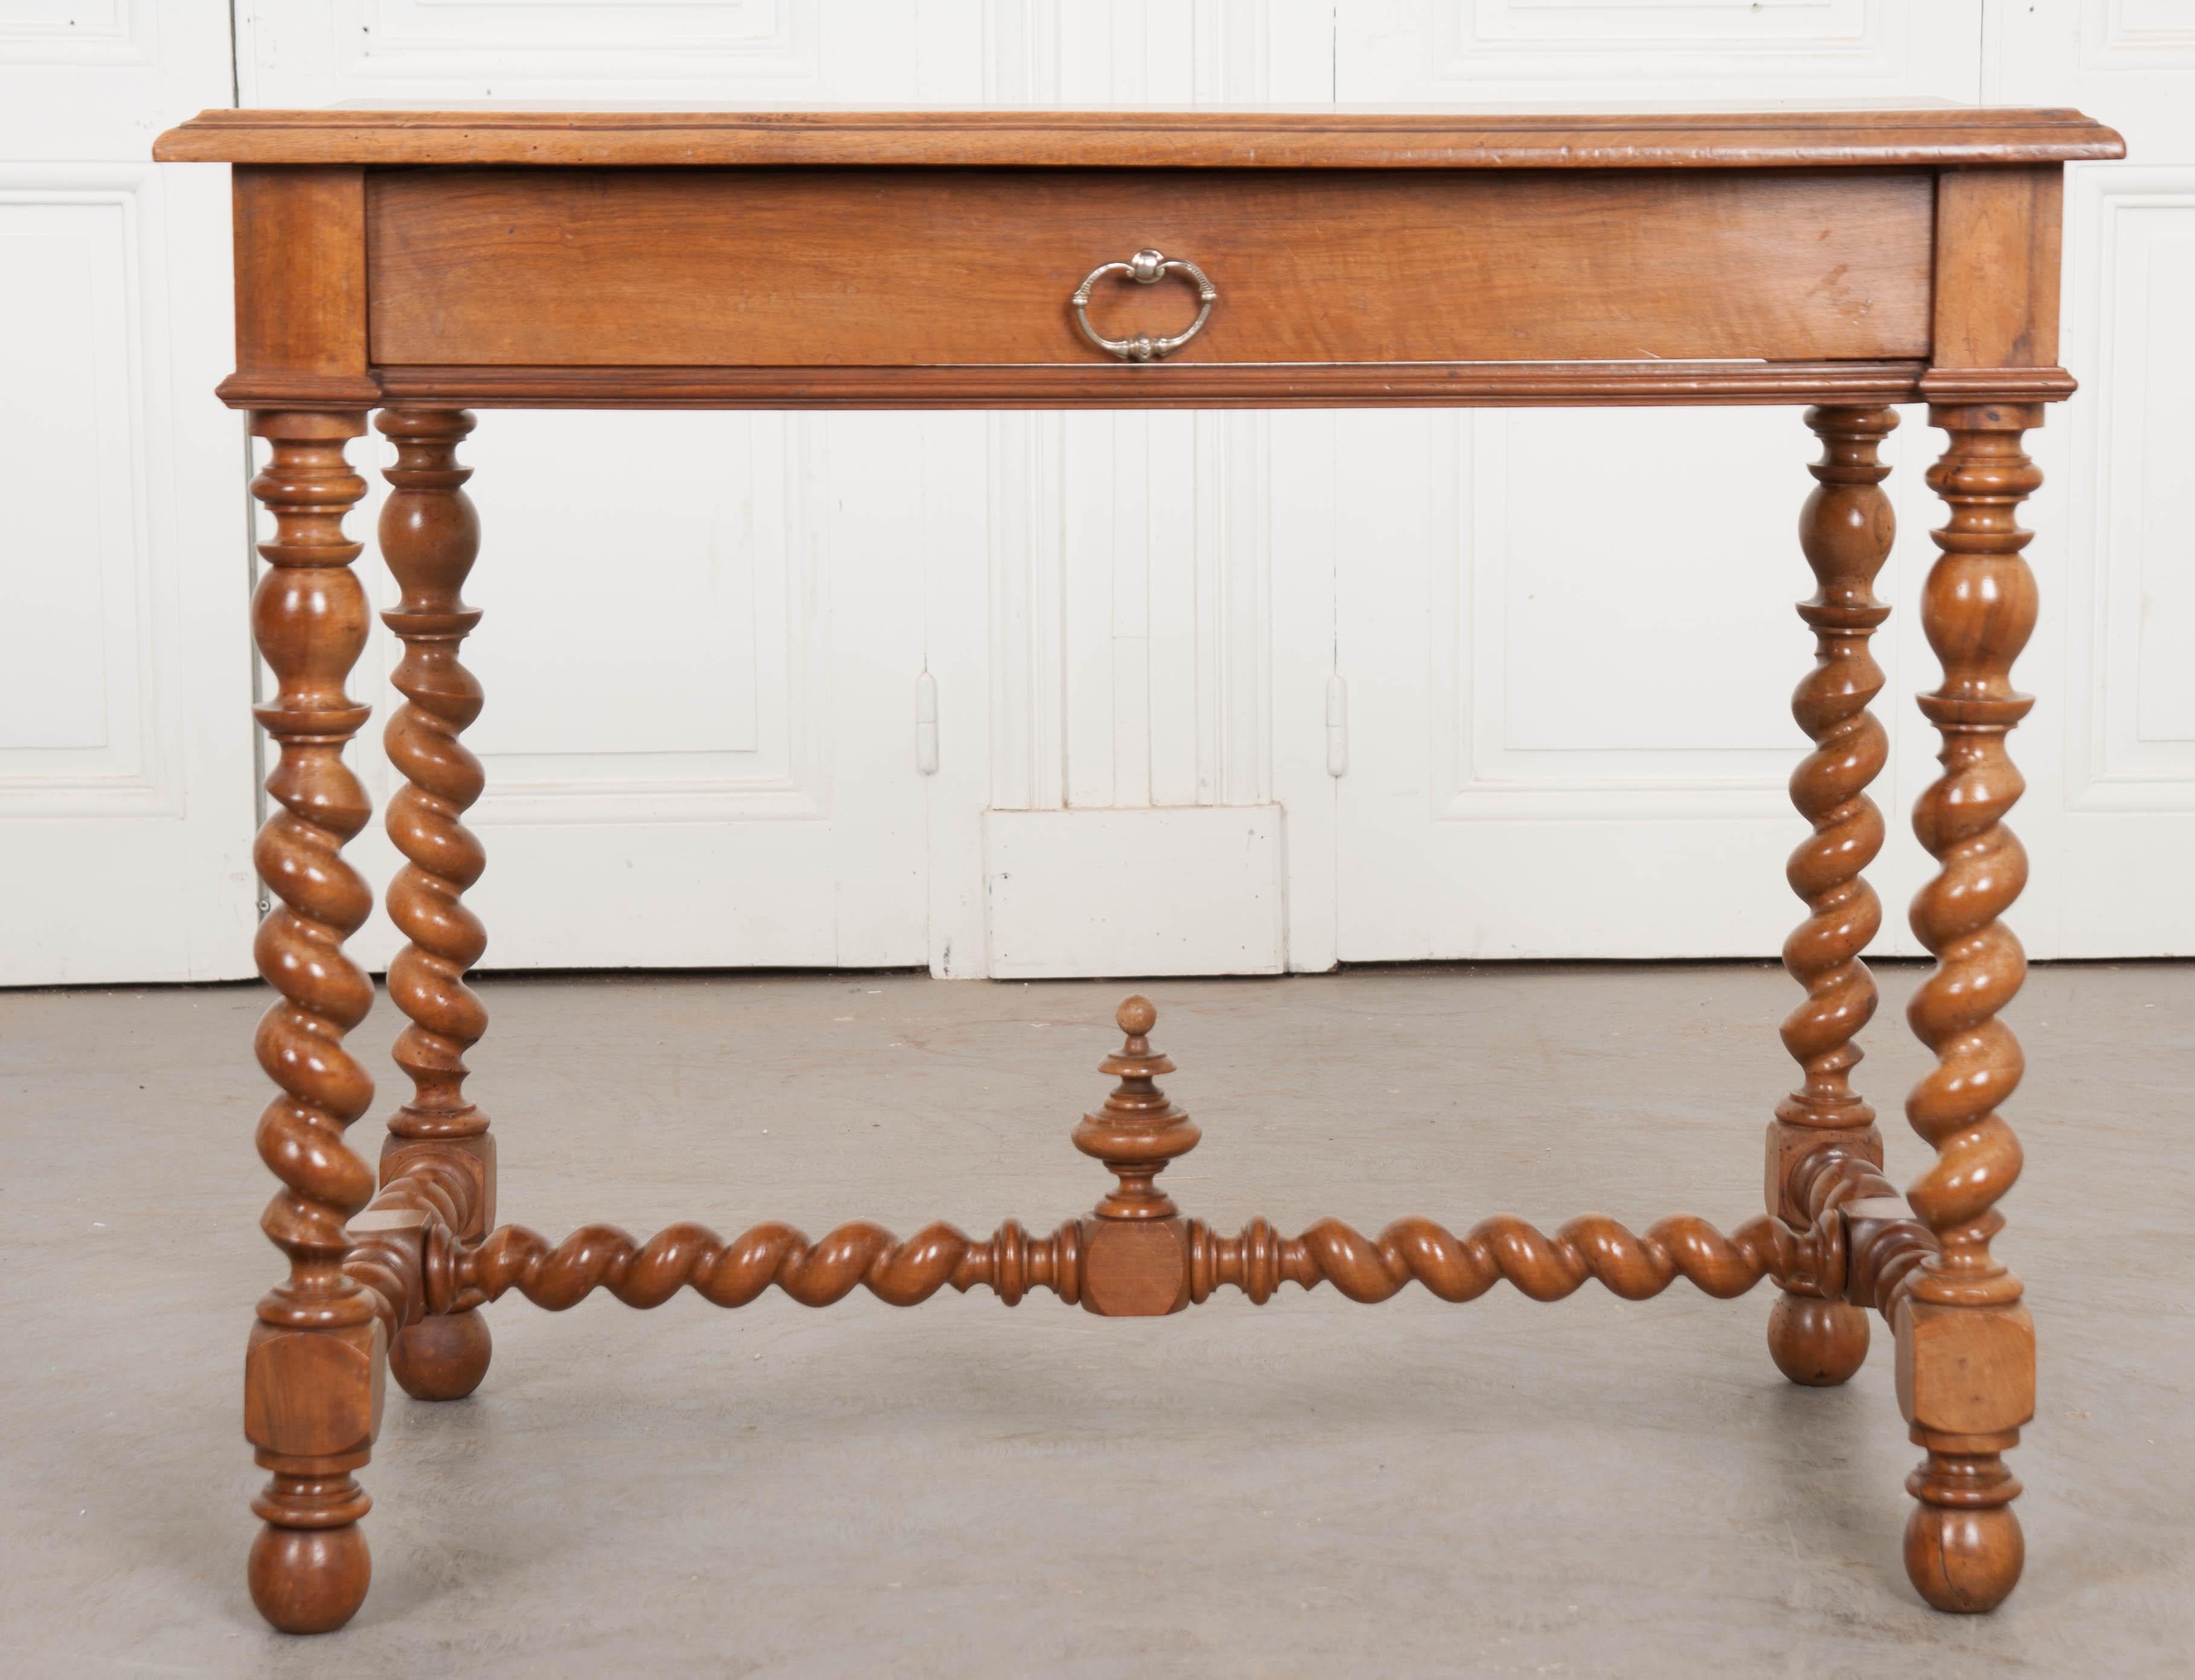 A fine French writing table, or desk, made of beautiful solid walnut, circa 1870. Four impeccably well-turned legs steal the show along with the table’s twisted stretcher. The legs and stretcher have been created in a barley twist design and meet at